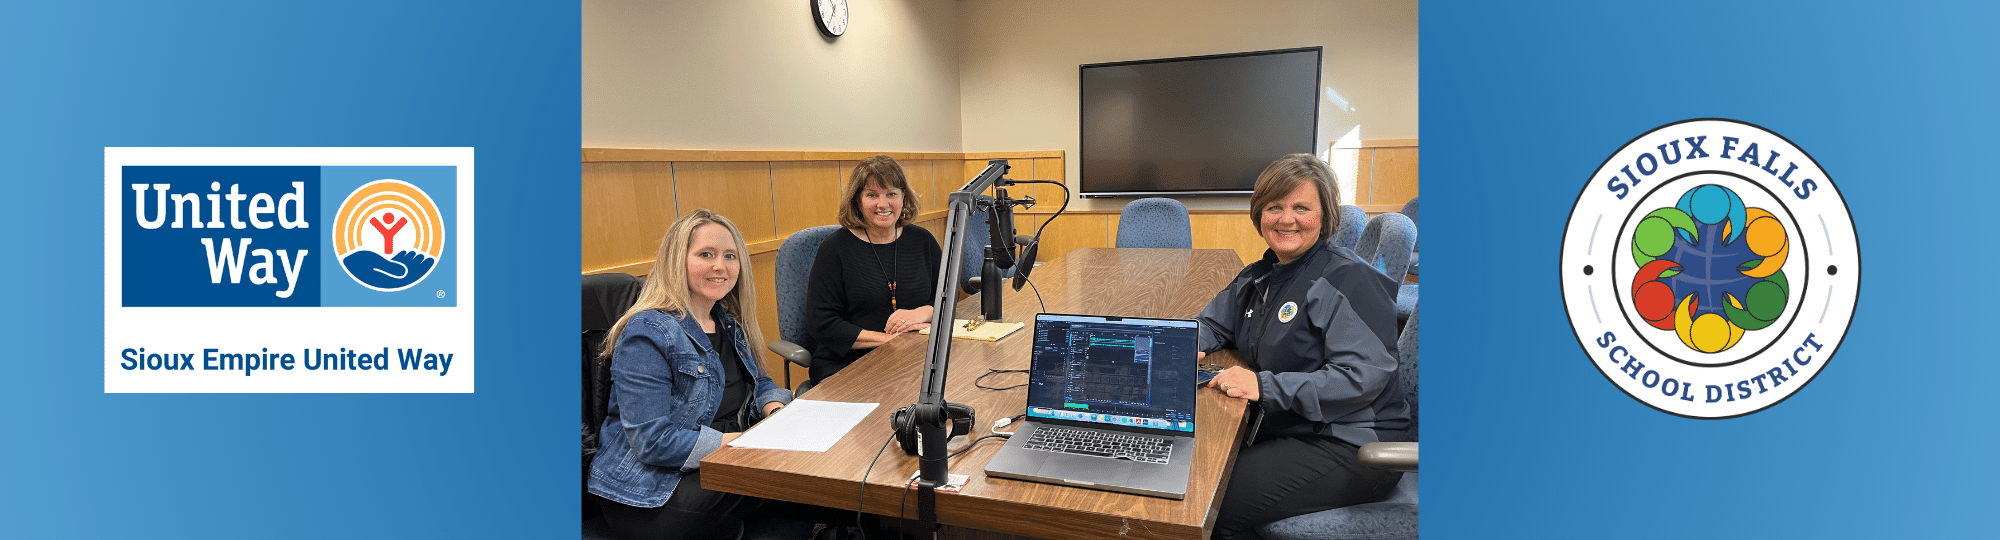 Collage of the Sioux Empire United Way logo, the Sioux Falls School District Logo, and an image of Christina Riss, Patti Lake-Torbert, and Dr. Jane Stavem recording a podcast